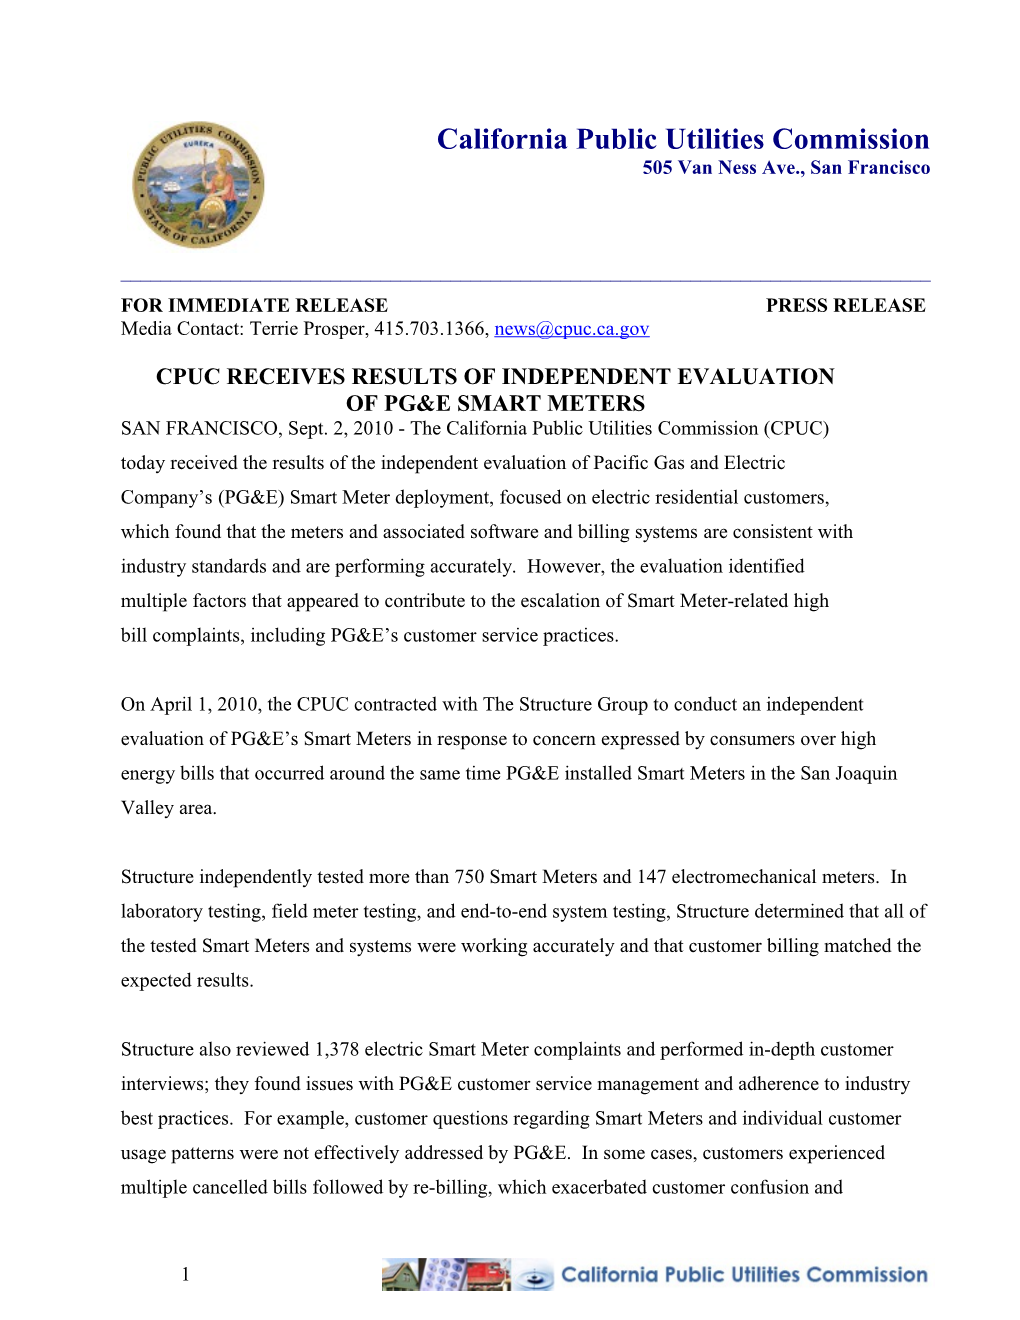 Cpuc Receives Results of Independent Evaluation of Pg&E Smart Meters